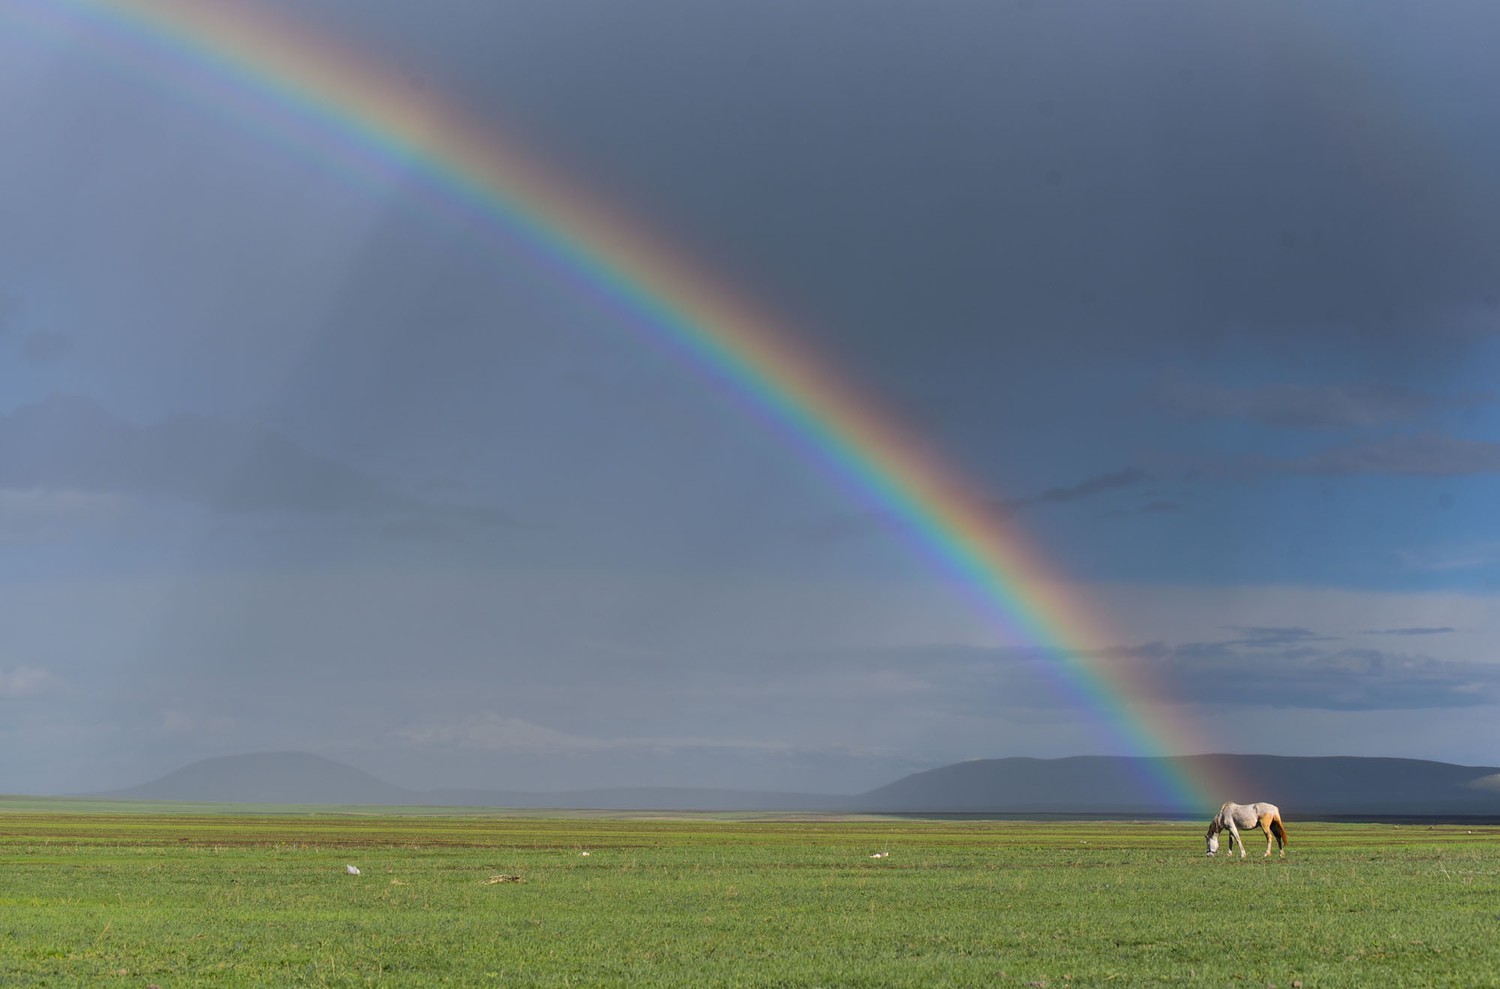 A single horse grazes in a wide, flat, field, with a rainbow in the sky behind it.